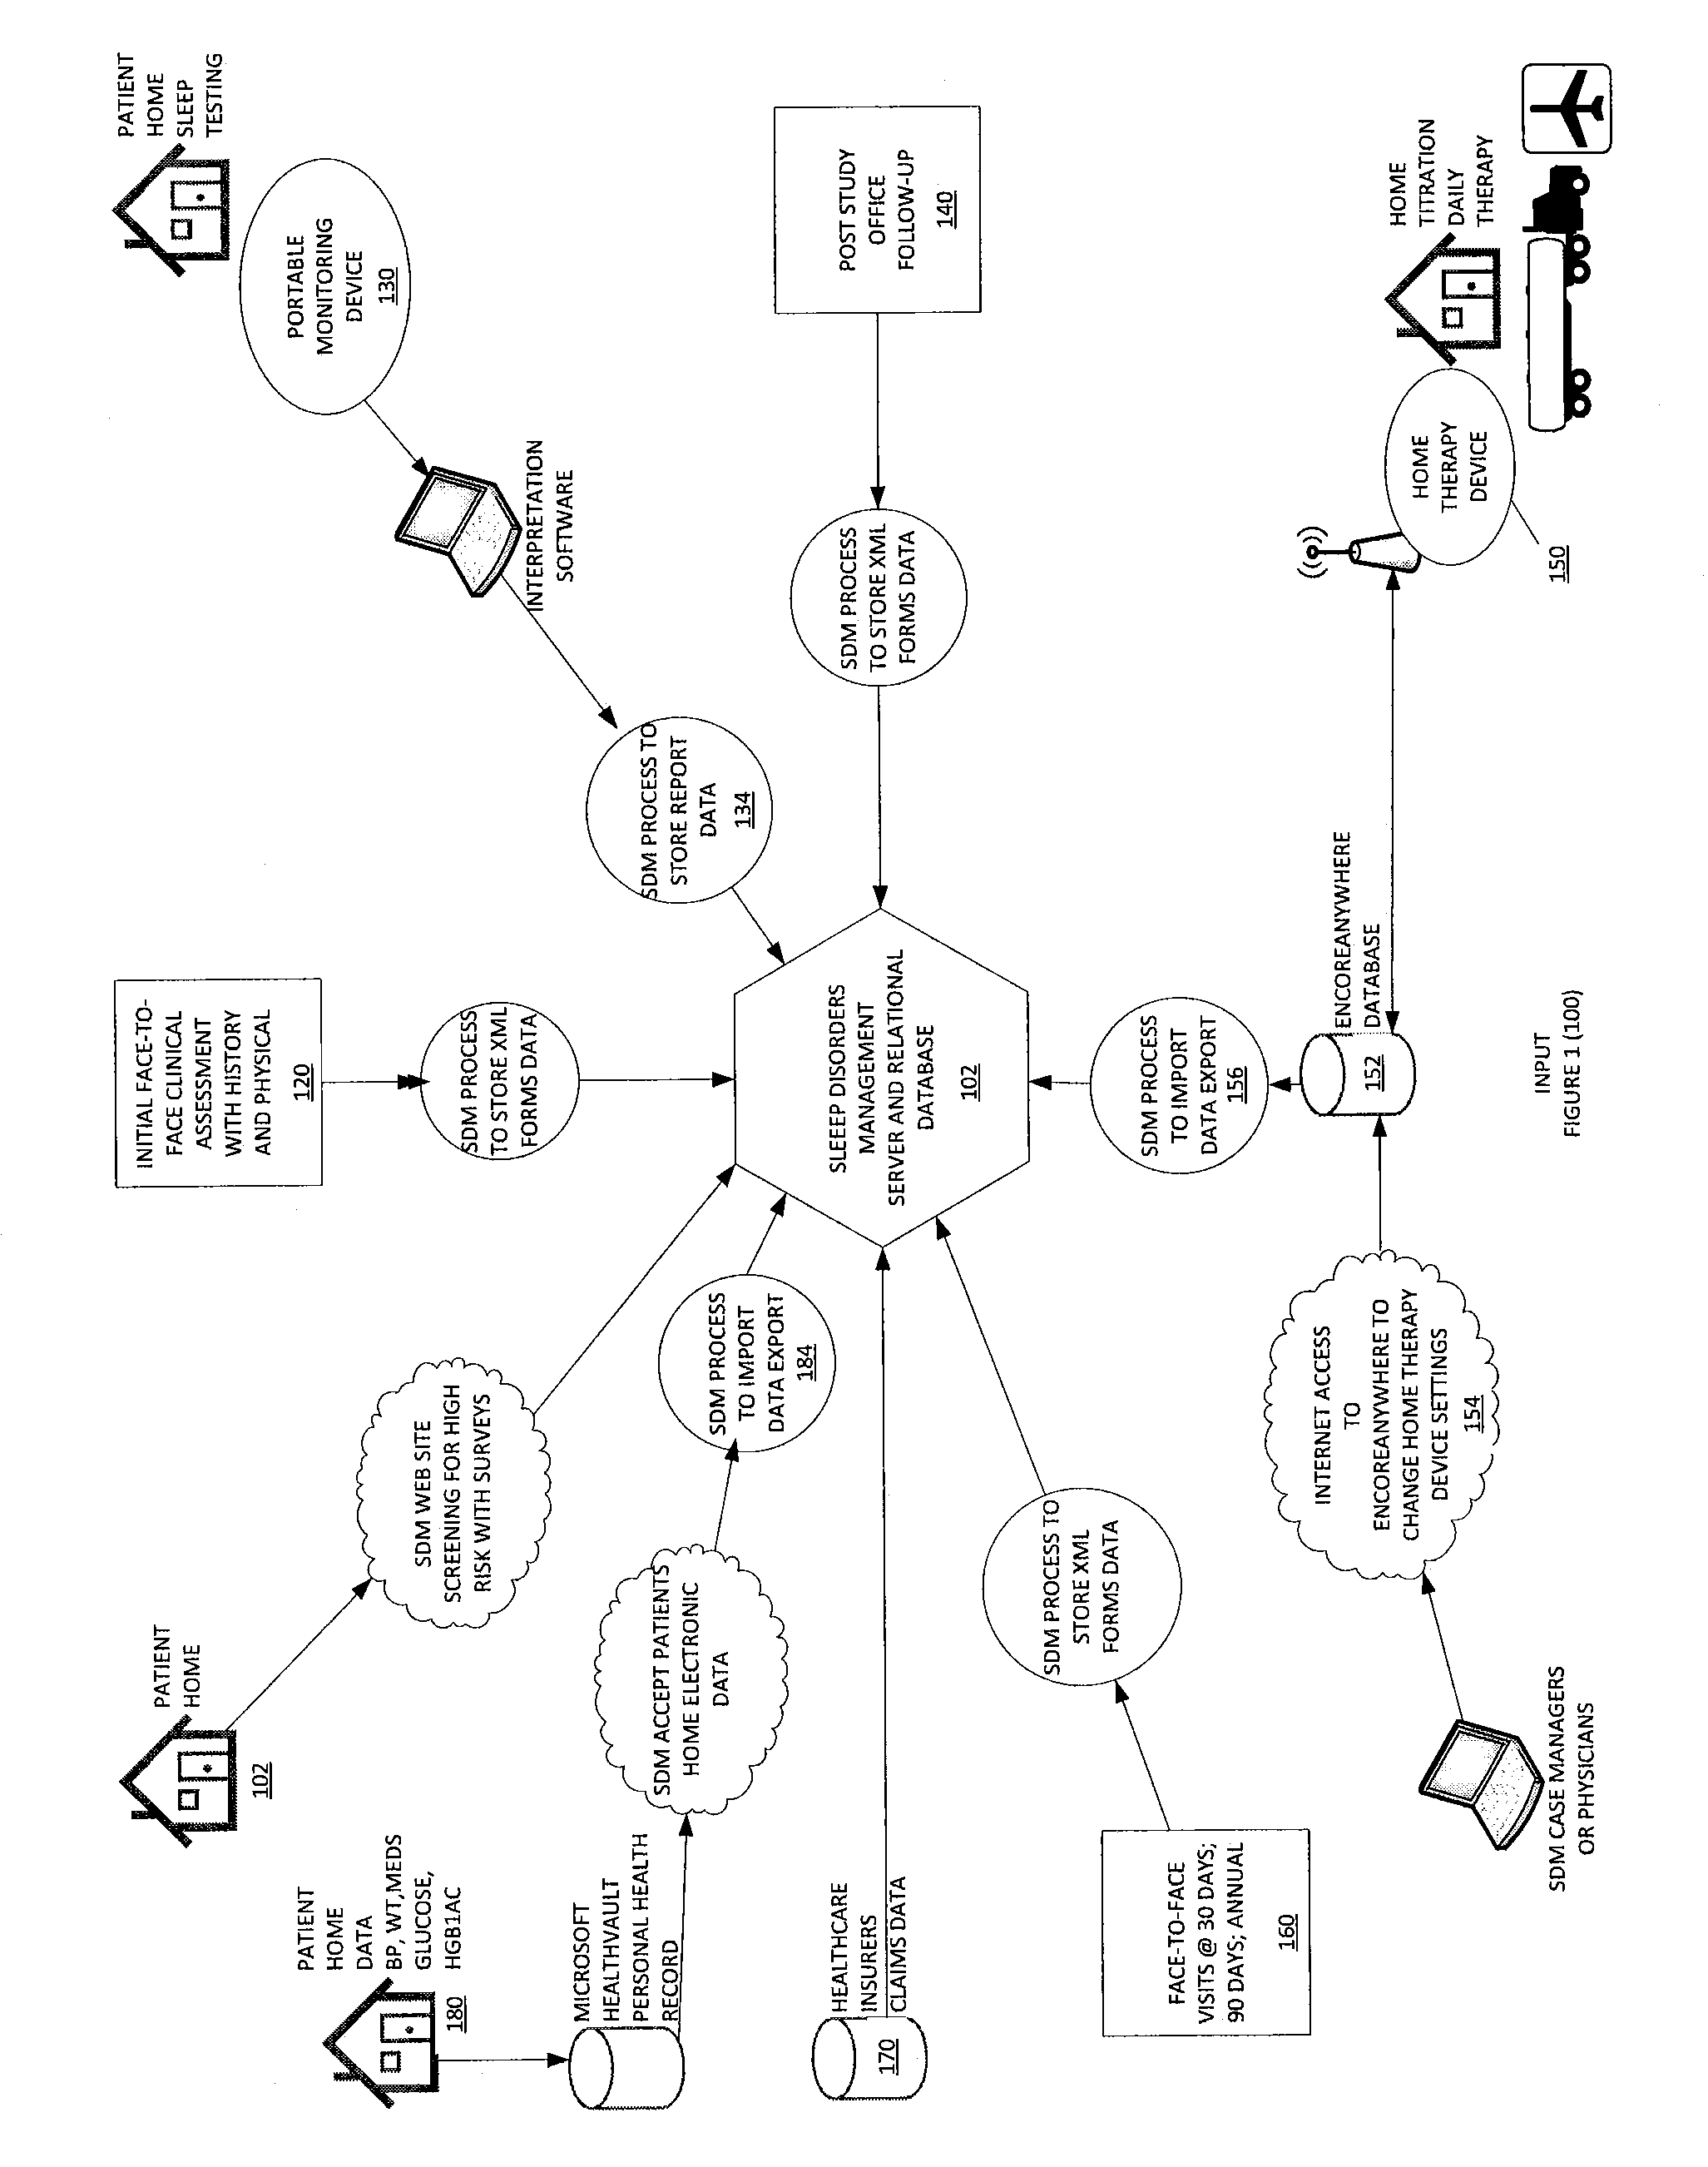 Systems and methods for diagnosing and treating sleep disorders